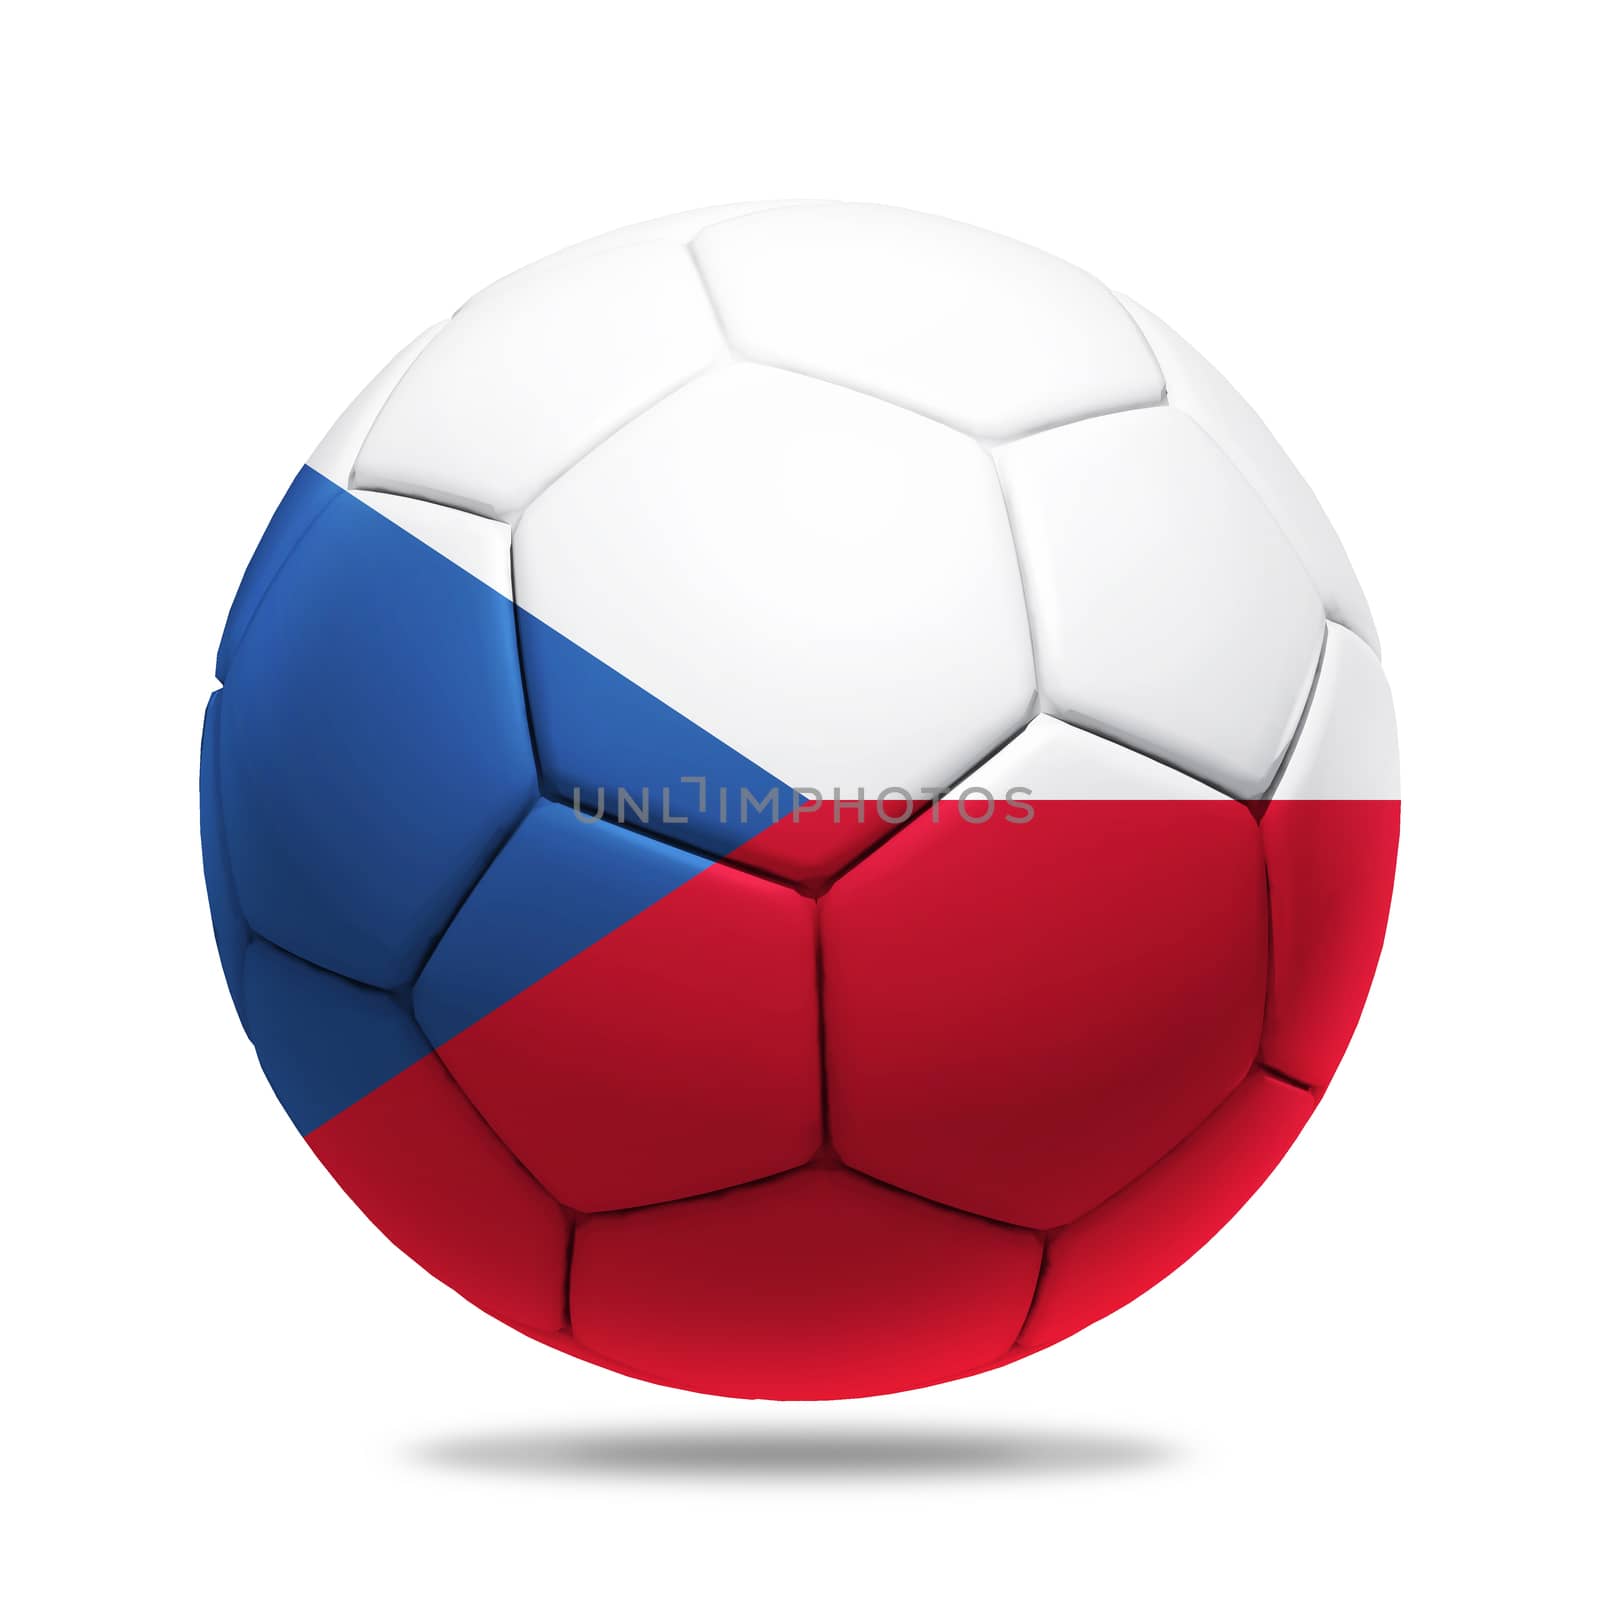 3D soccer ball with Czech Republic team flag, isolated on white